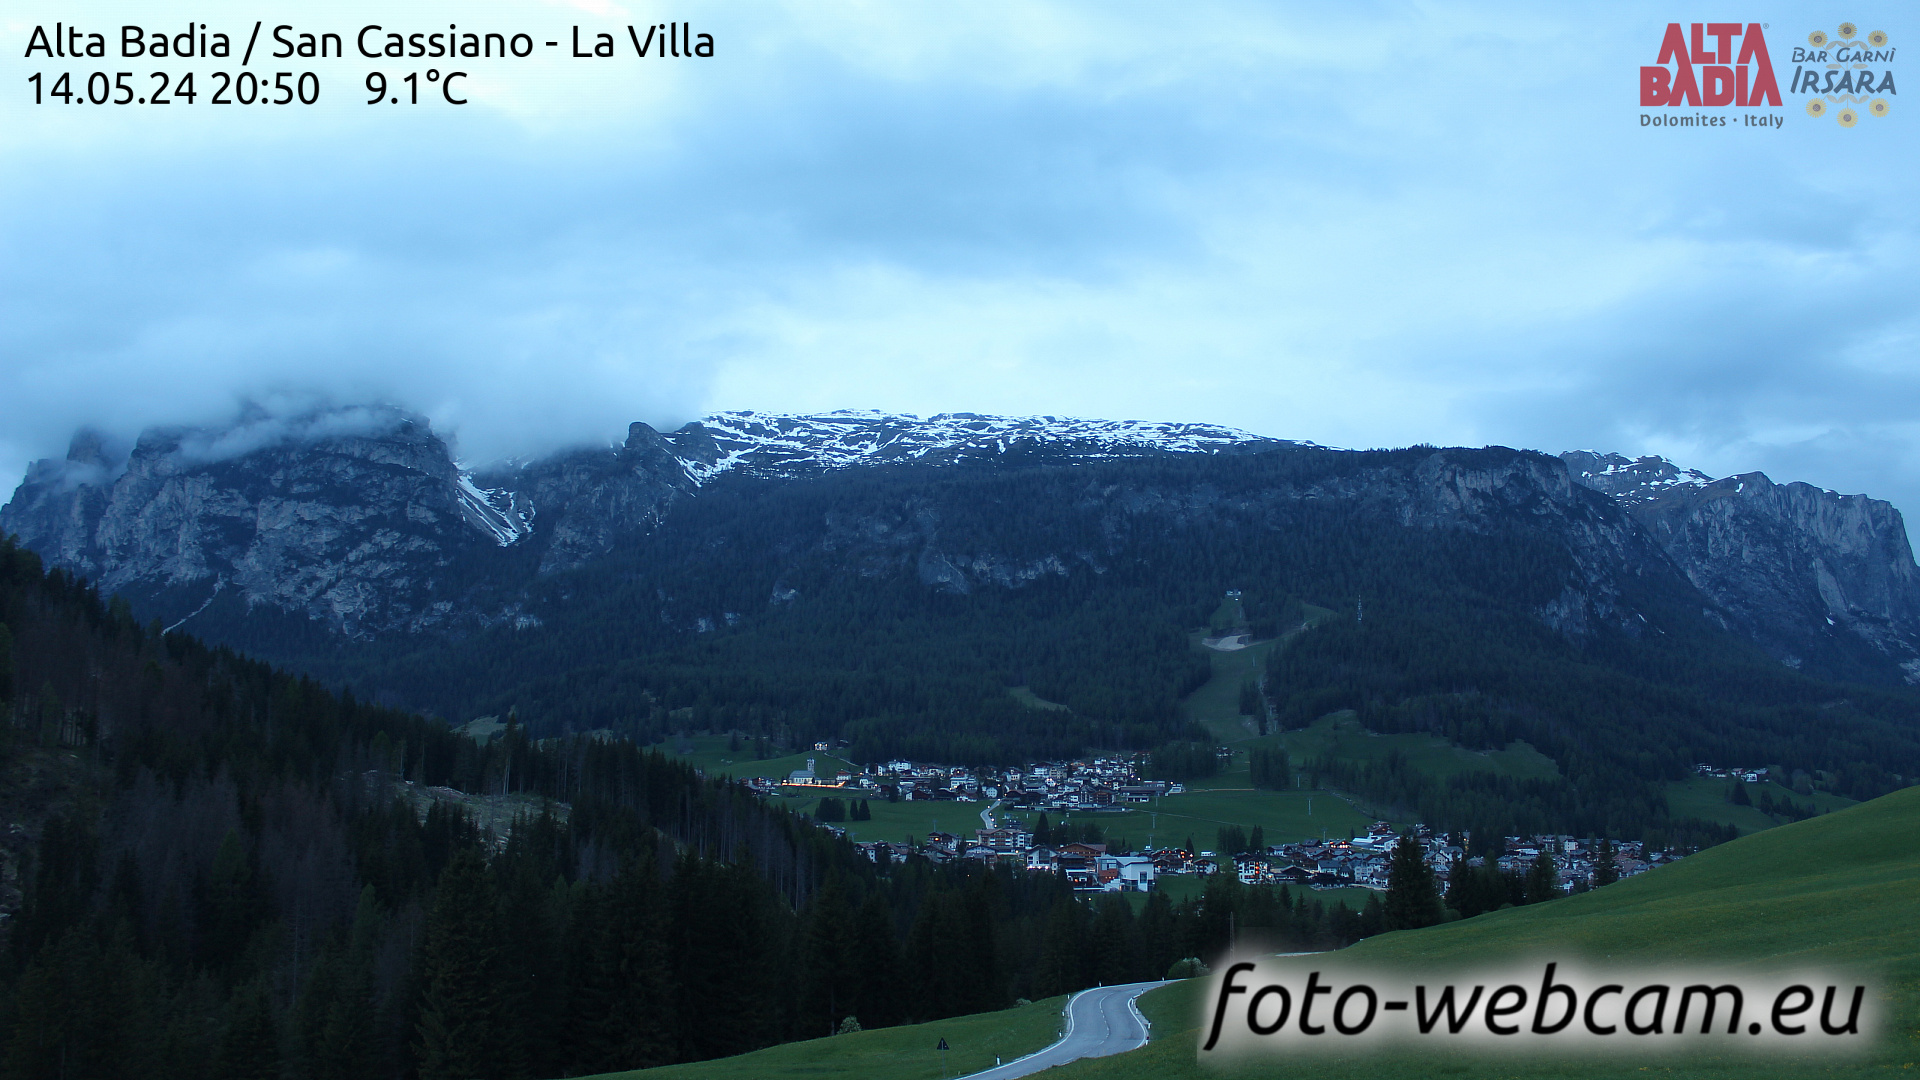 San Cassiano Wed. 21:00